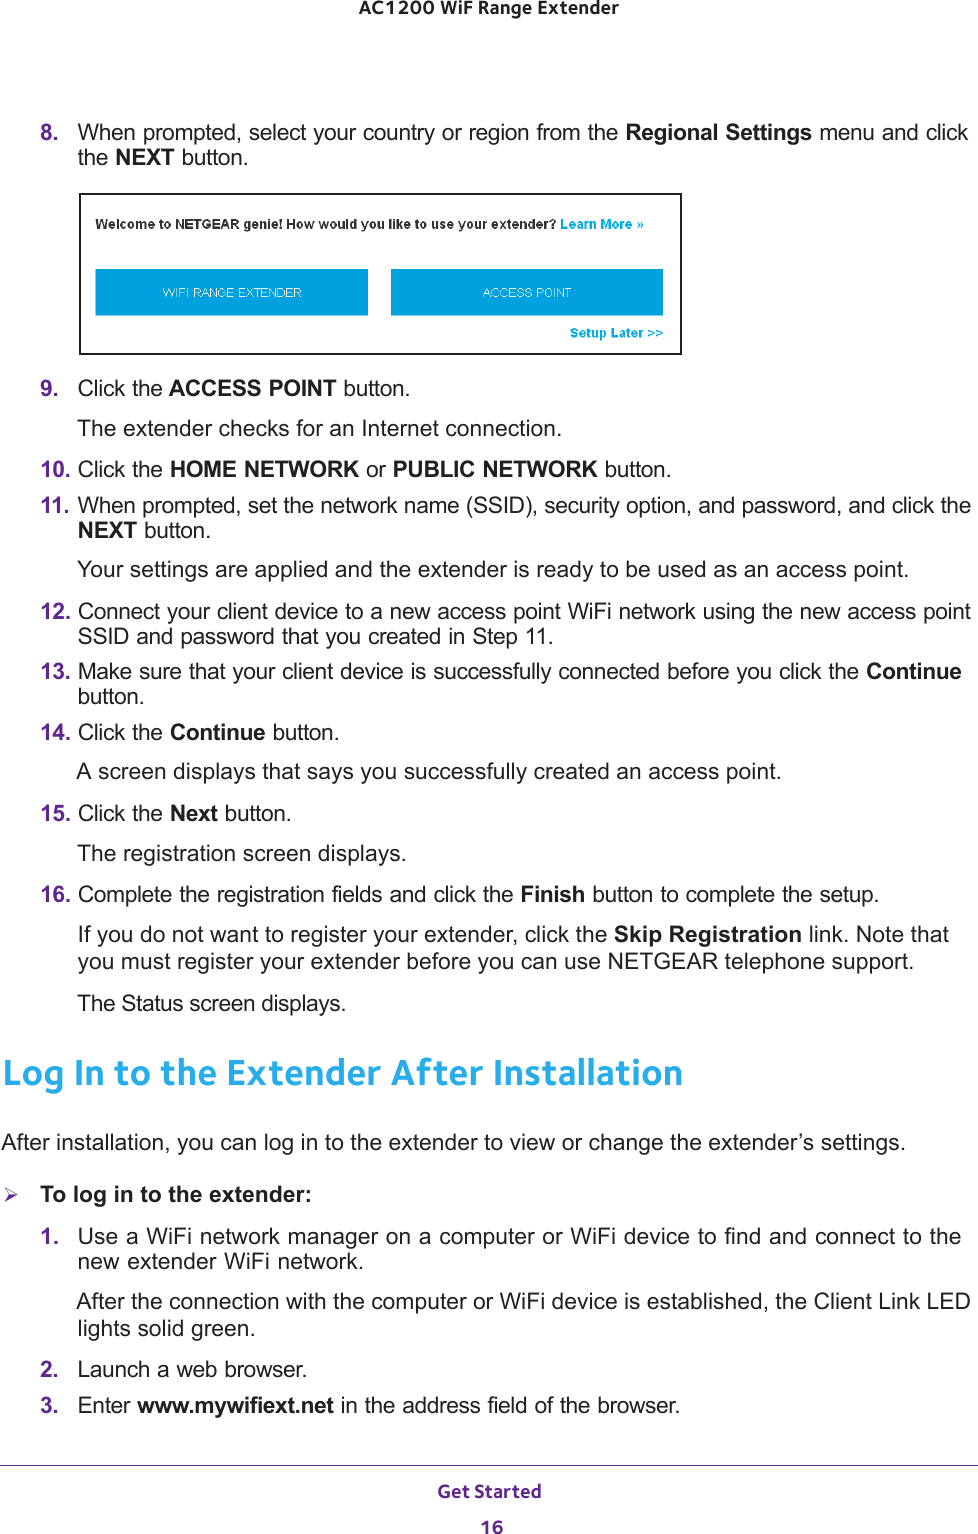 Get Started 16AC1200 WiF Range Extender 8.  When prompted, select your country or region from the Regional Settings menu and click the NEXT button.9.  Click the ACCESS POINT button.The extender checks for an Internet connection.10. Click the HOME NETWORK or PUBLIC NETWORK button.11. When prompted, set the network name (SSID), security option, and password, and click the NEXT button.Your settings are applied and the extender is ready to be used as an access point.12. Connect your client device to a new access point WiFi network using the new access point SSID and password that you created in Step 11.13. Make sure that your client device is successfully connected before you click the Continue button.14. Click the Continue button.A screen displays that says you successfully created an access point.15. Click the Next button.The registration screen displays.16. Complete the registration fields and click the Finish button to complete the setup.If you do not want to register your extender, click the Skip Registration link. Note that you must register your extender before you can use NETGEAR telephone support.The Status screen displays.Log In to the Extender After InstallationAfter installation, you can log in to the extender to view or change the extender’s settings.To log in to the extender:1.  Use a WiFi network manager on a computer or WiFi device to find and connect to the new extender WiFi network.After the connection with the computer or WiFi device is established, the Client Link LED lights solid green.2.  Launch a web browser.3.  Enter www.mywifiext.net in the address field of the browser.